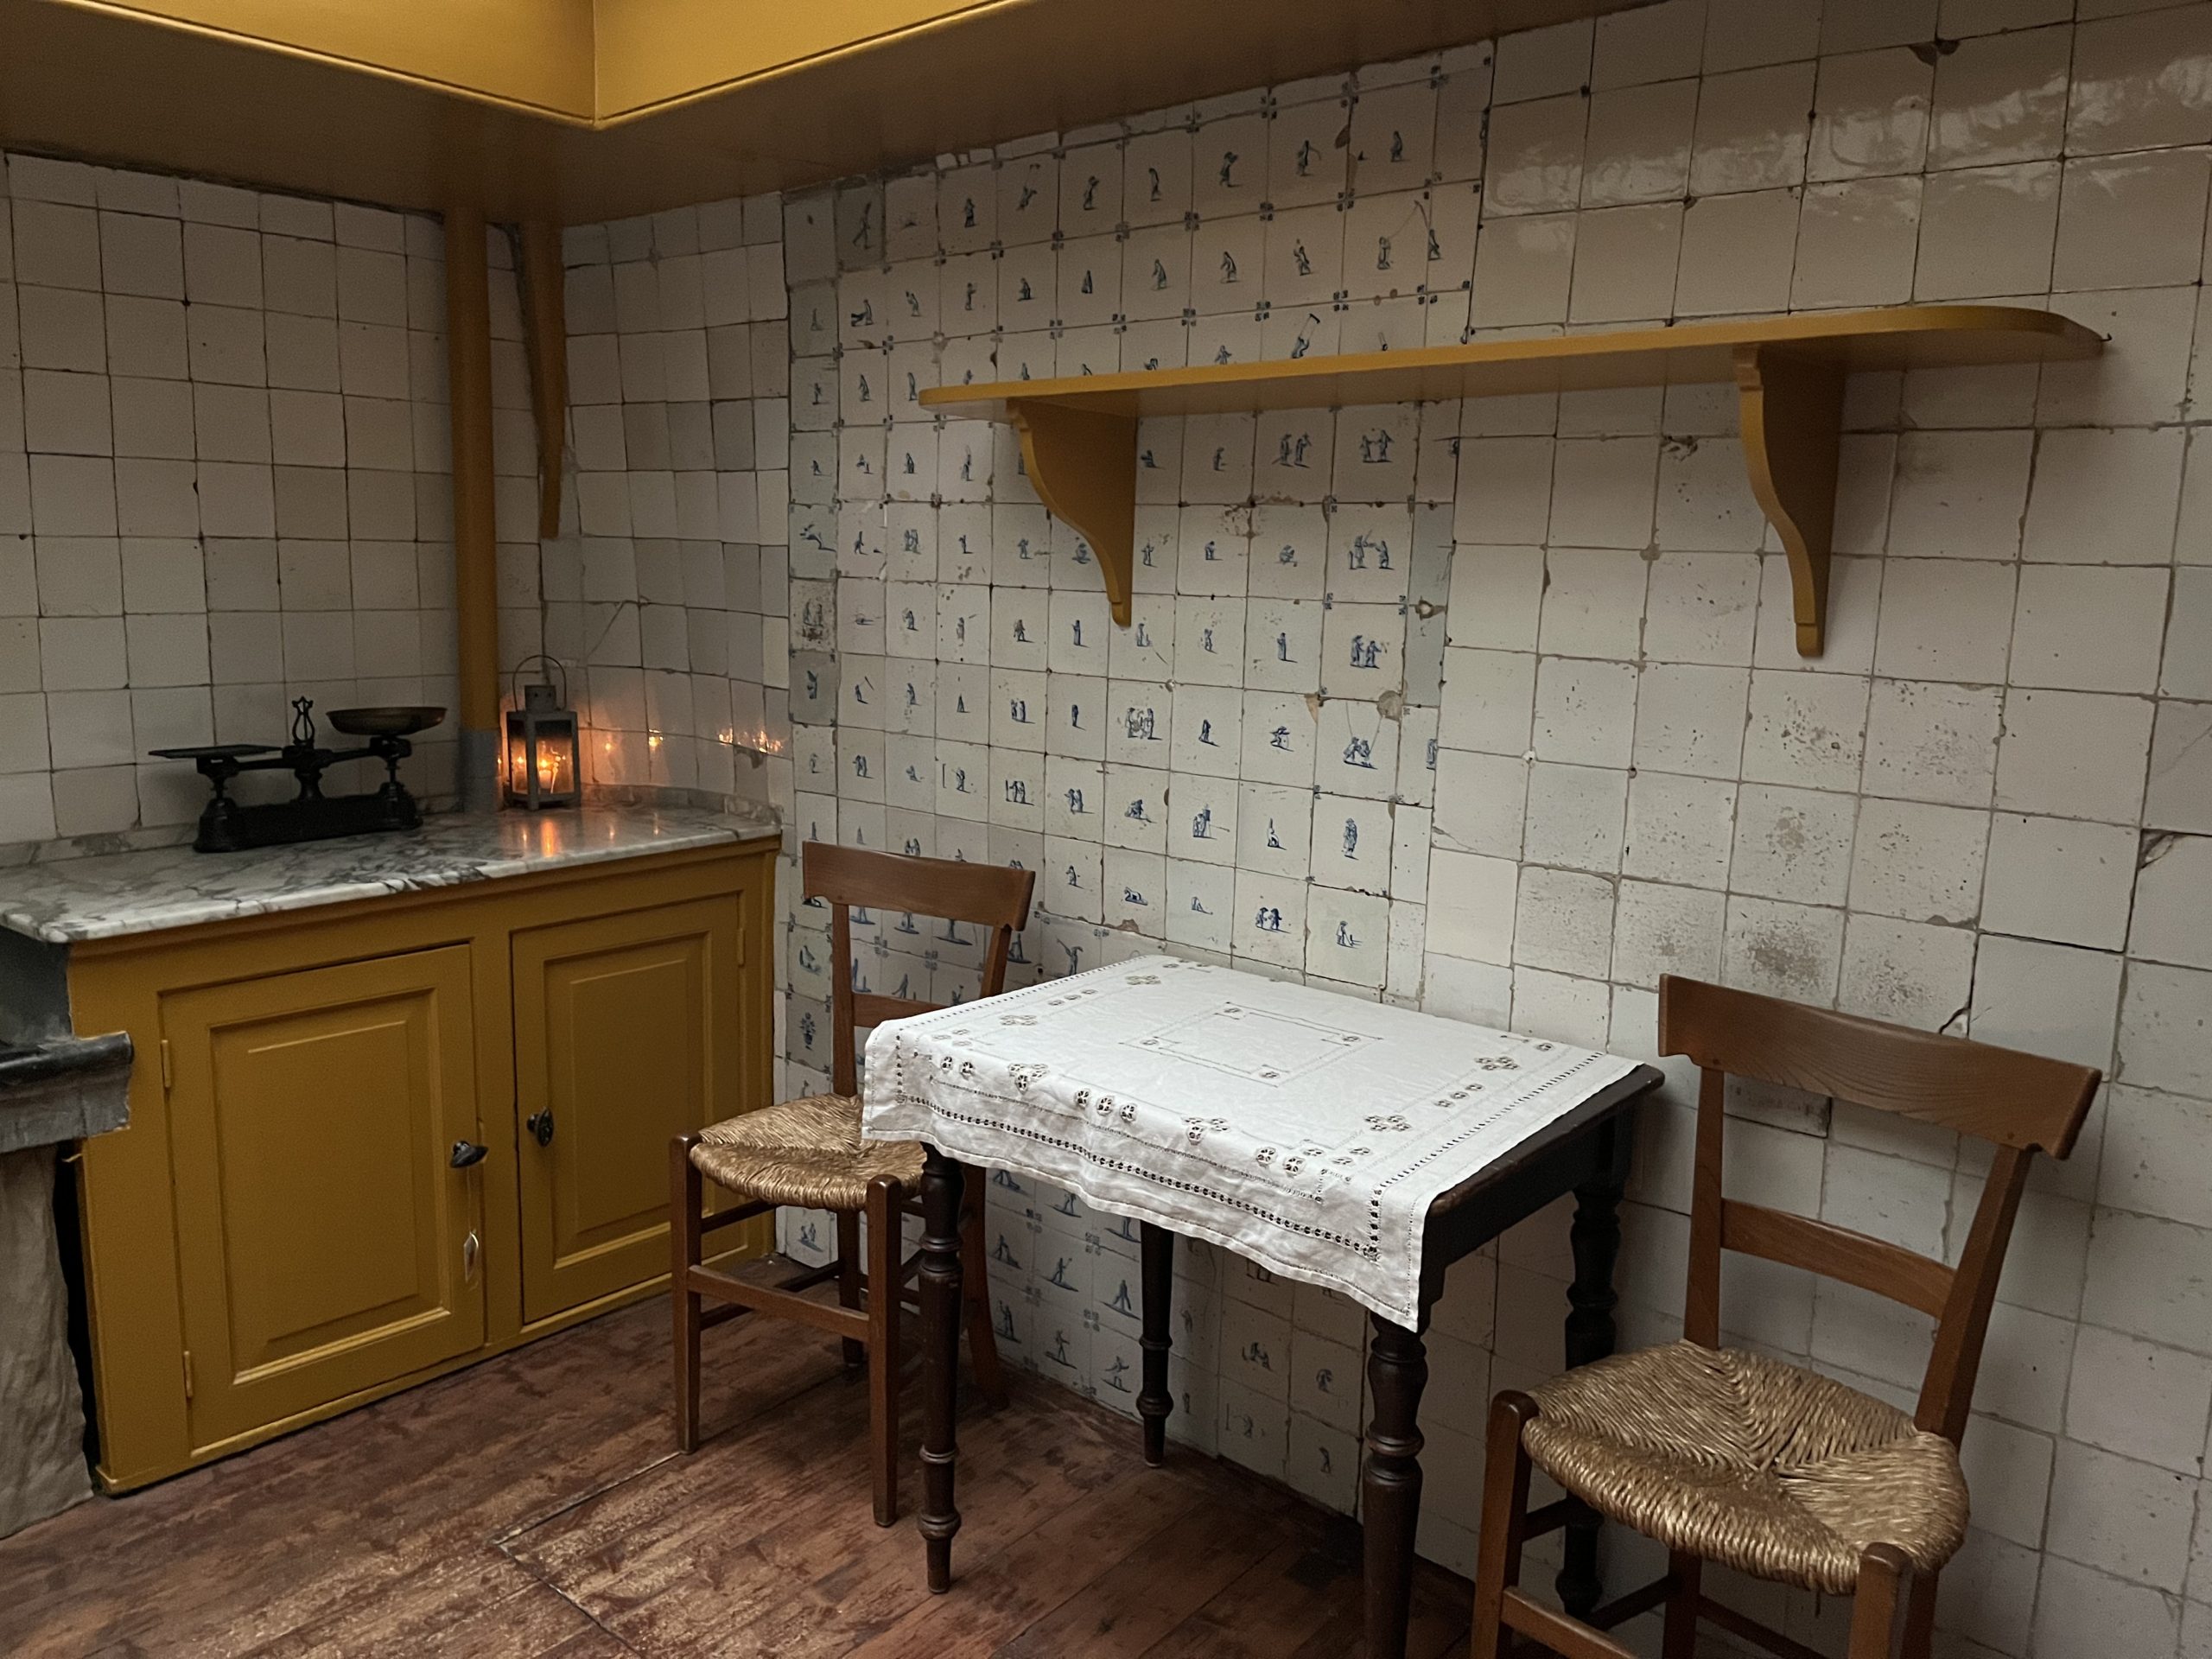 Our Lord in the Attic Museum kitchen with original a7th century Dutch tiles